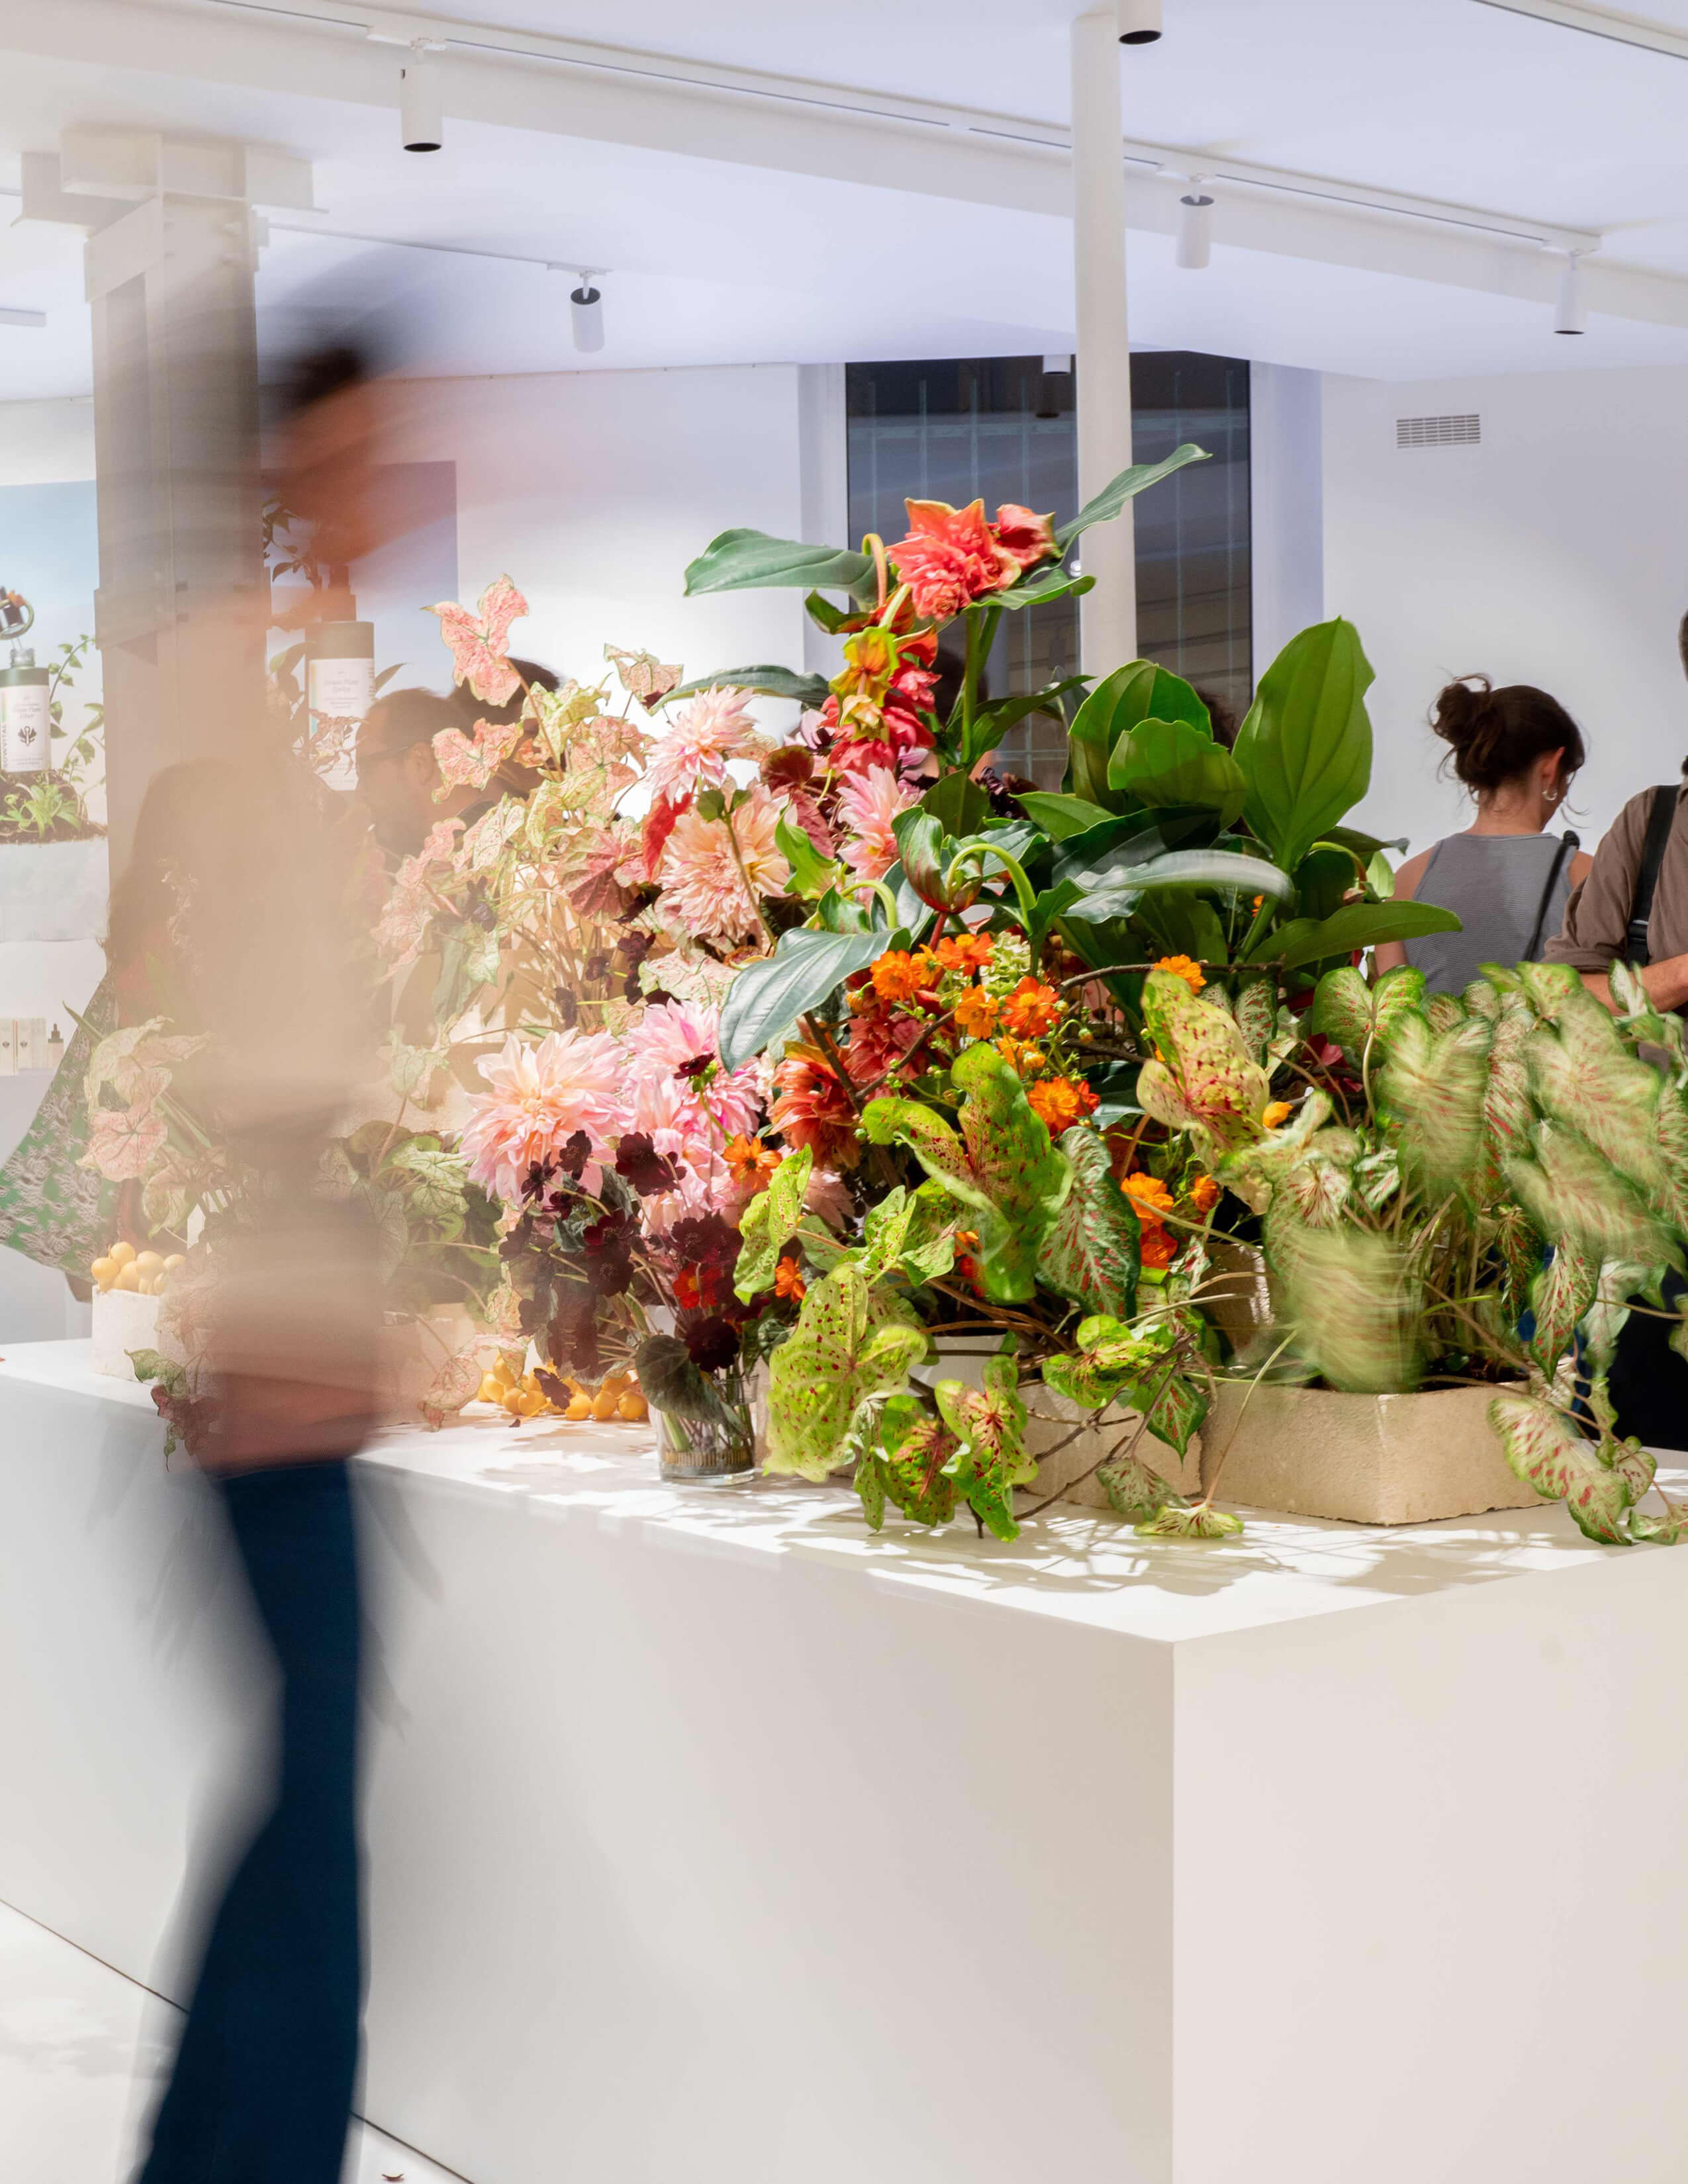 An extensive collection of different kinds of plants and flowers was presented on the cube desk while people were around it.